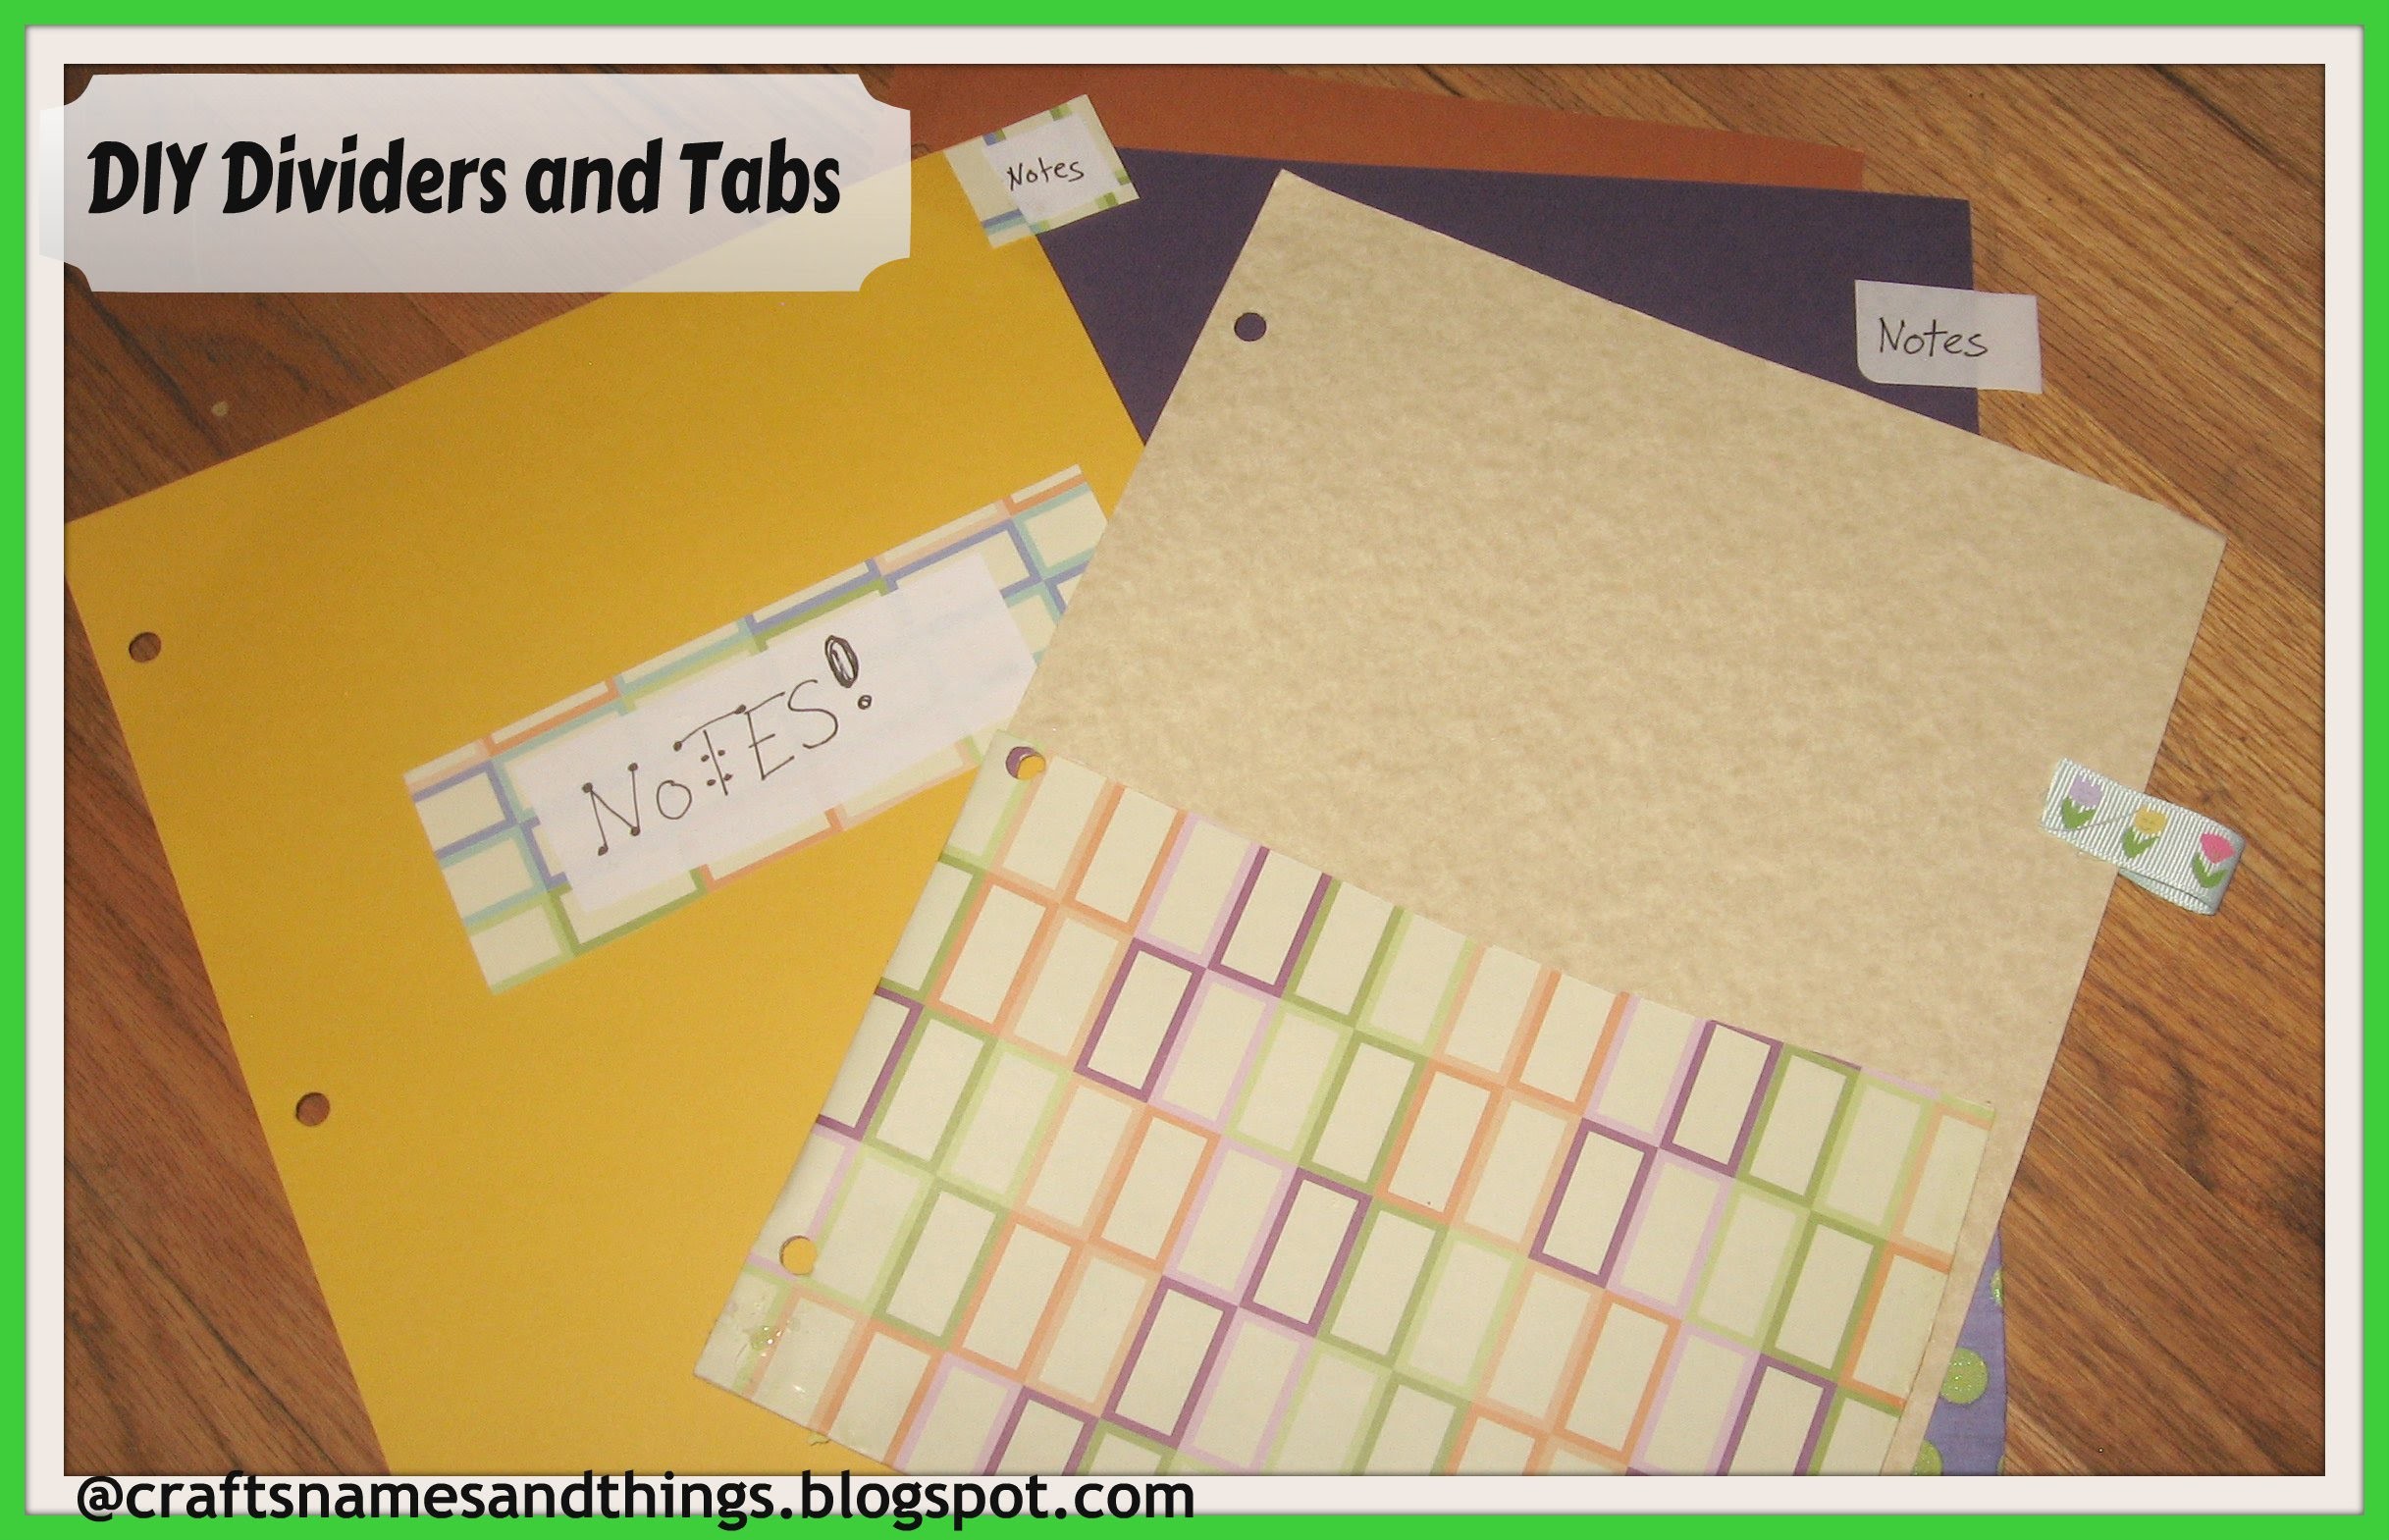 diy-how-to-make-binder-dividers-with-pockets-and-tabs-diy-school